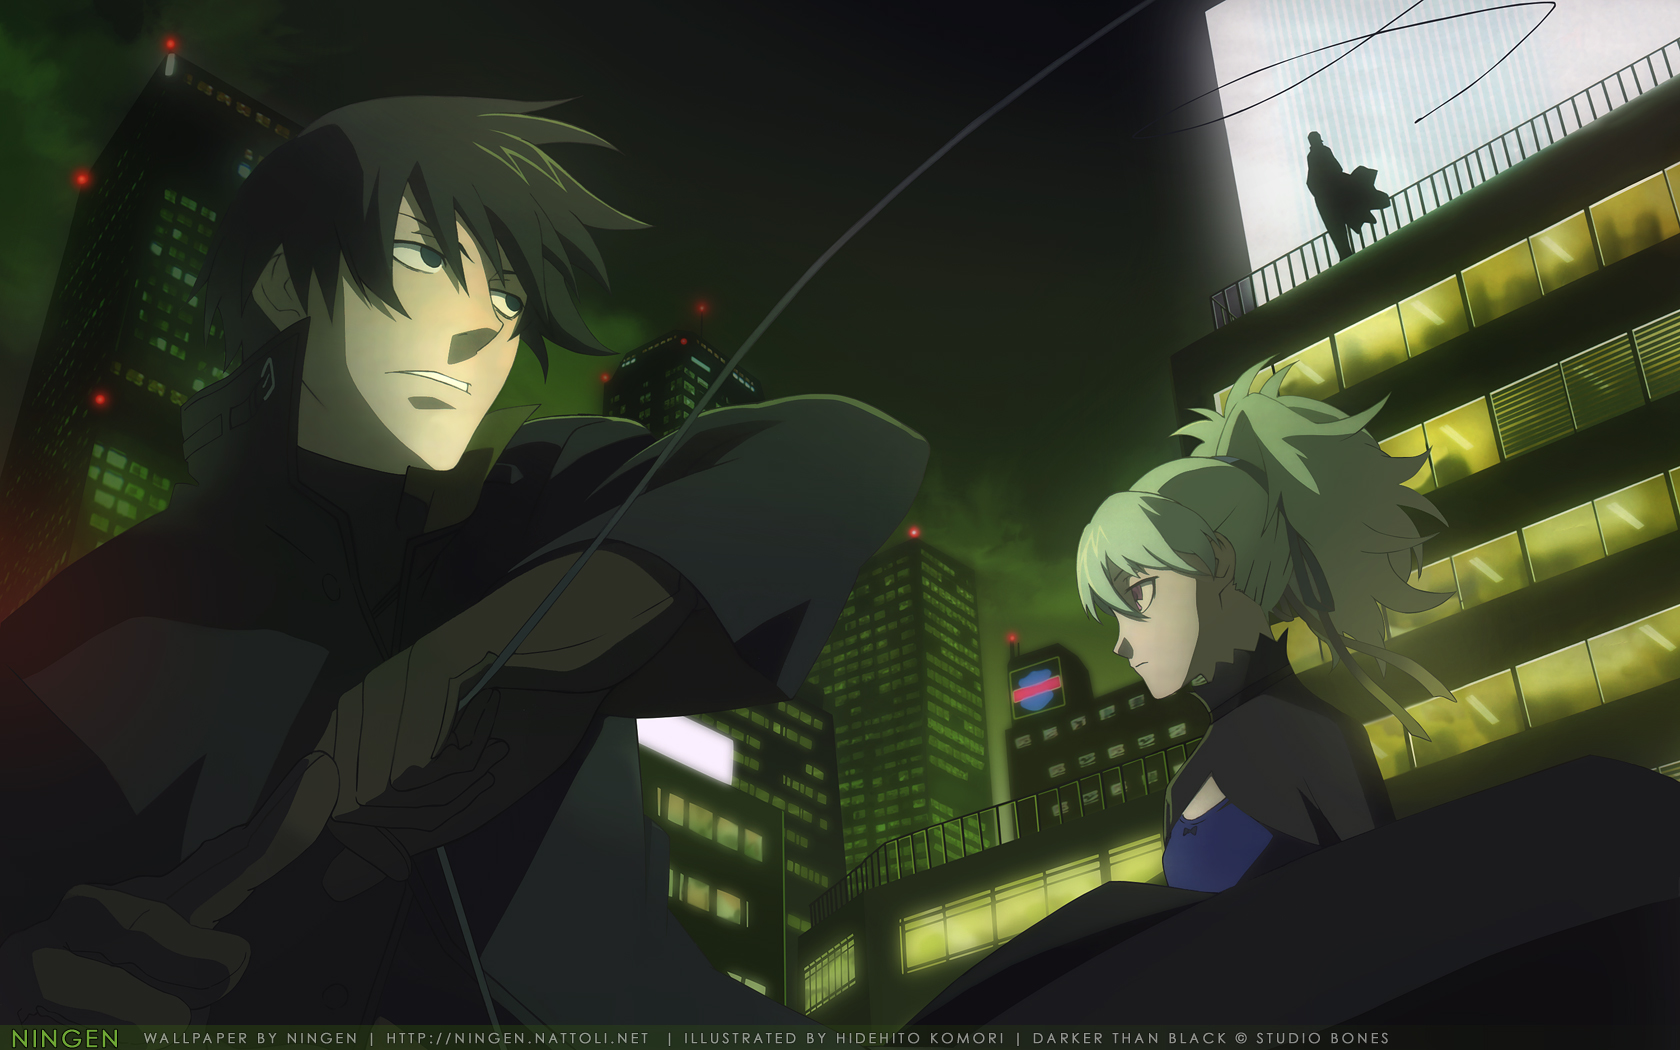 Darker than Black: Hei and Yin embrace in a dramatic anime scene.